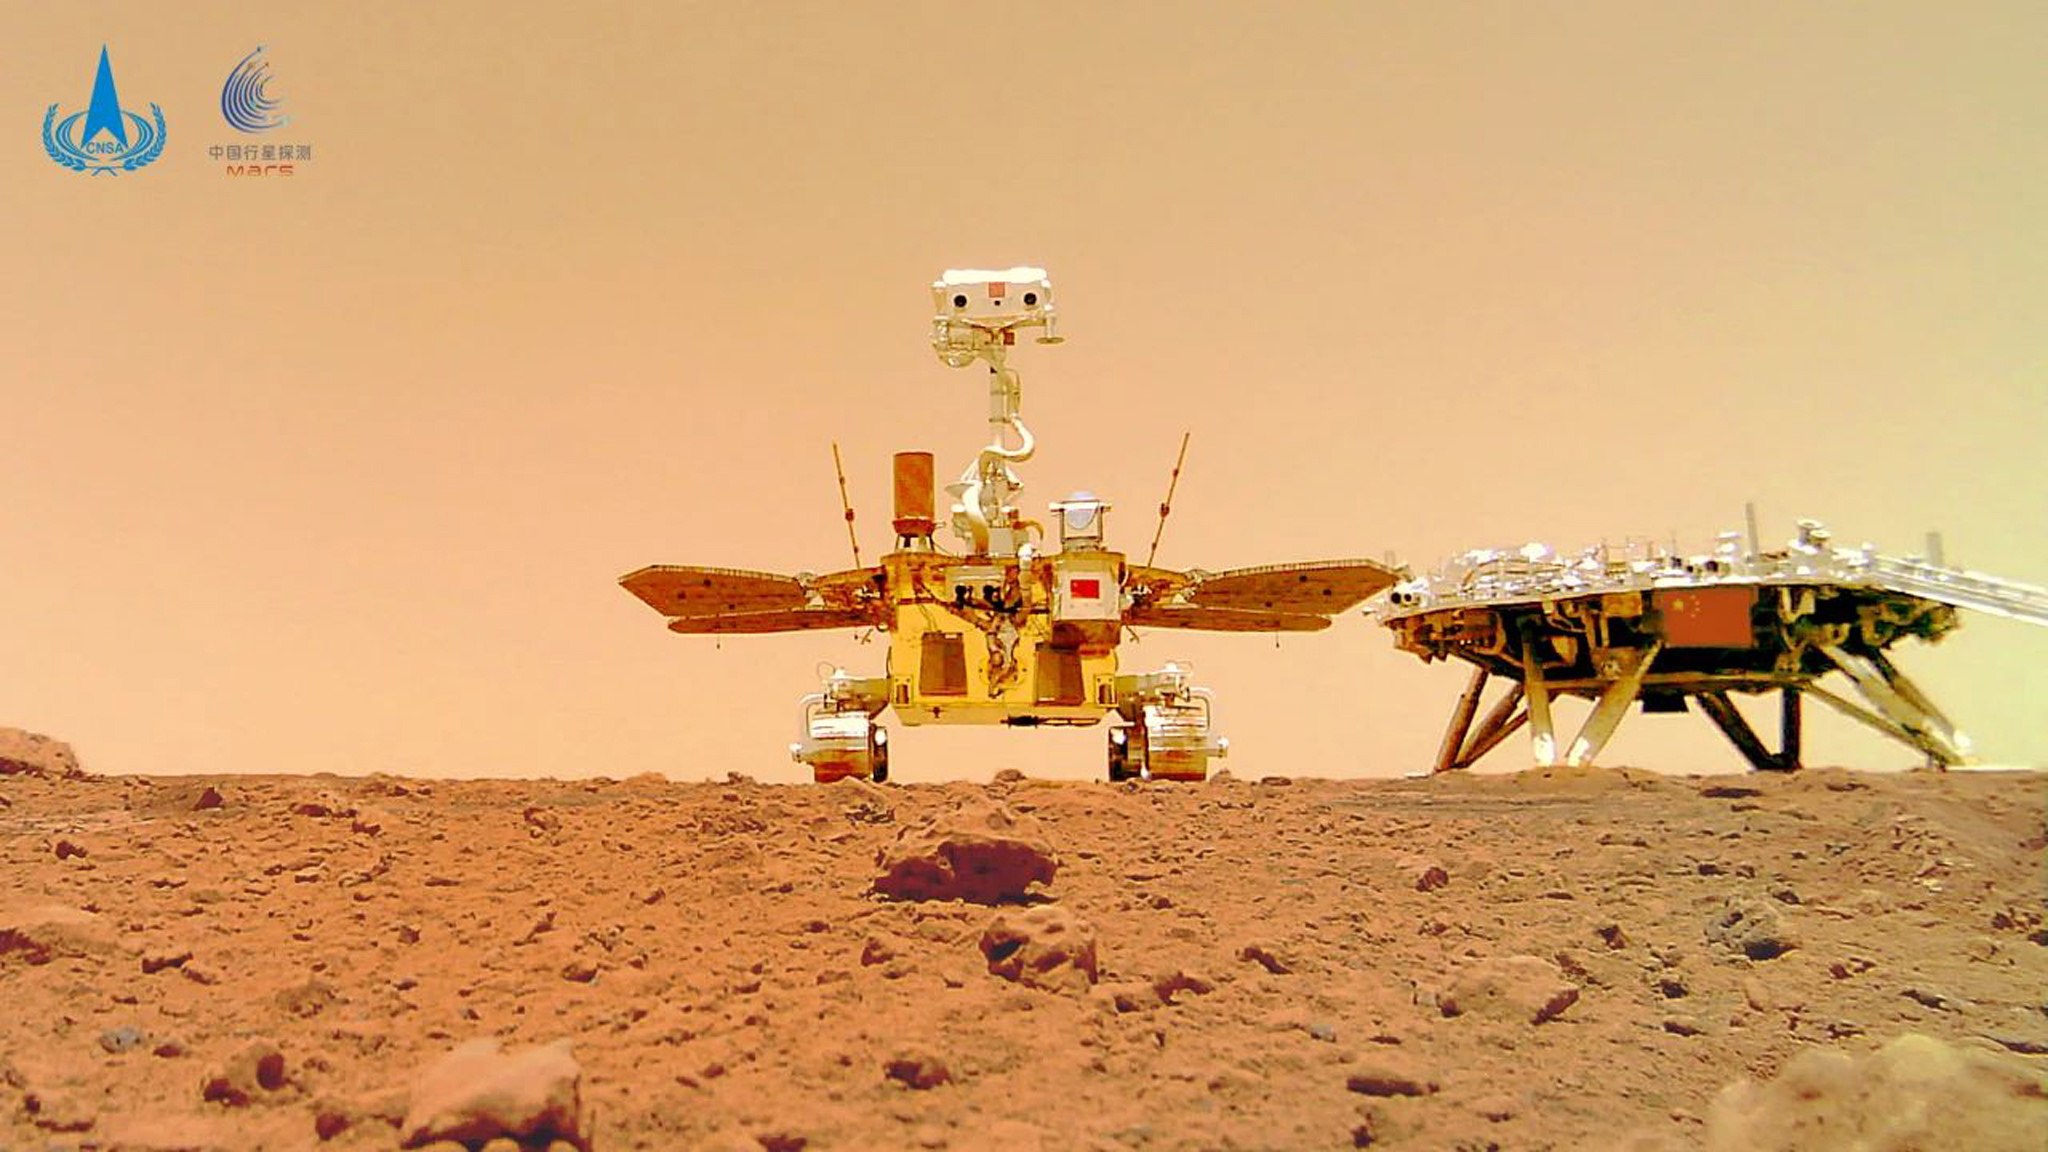 Zhurong’s butterfly-shaped solar panels were designed to resist dust, but harsh sandstorms might have hindered the rover’s ability to generate power, according to one source. Photo: EPA-EFE